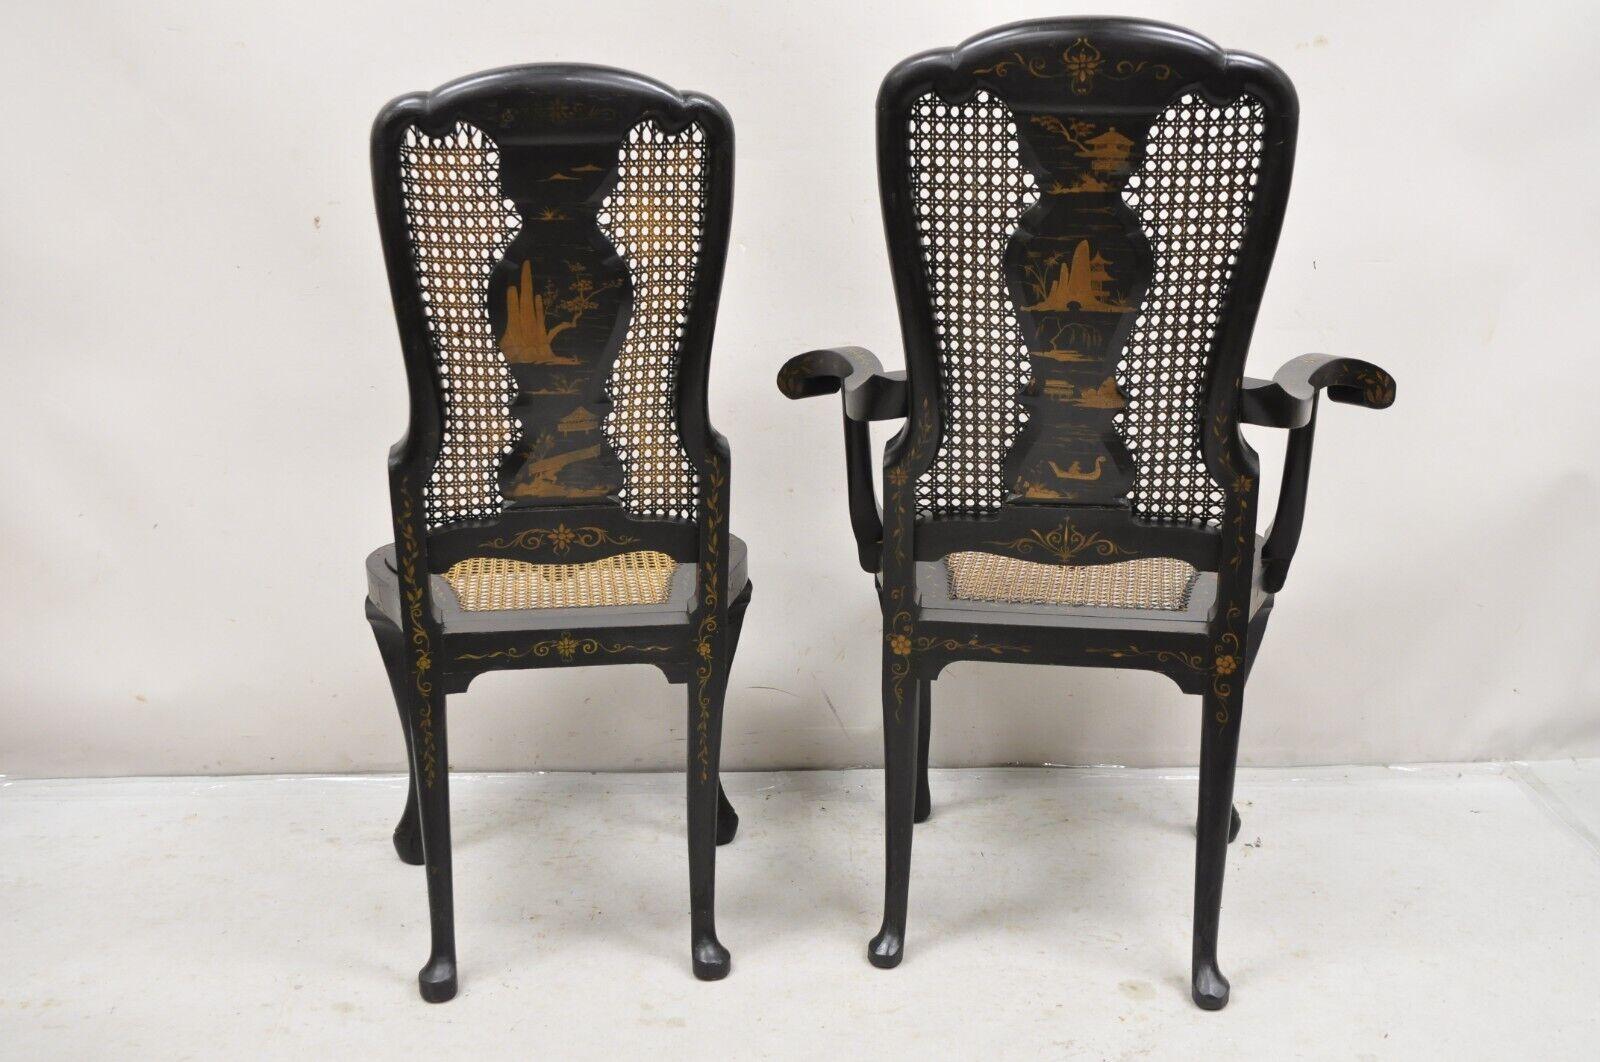 Antique Chinoiserie Queen Anne Hand Painted Floral Cane Dining Chairs - Set of 4 For Sale 5